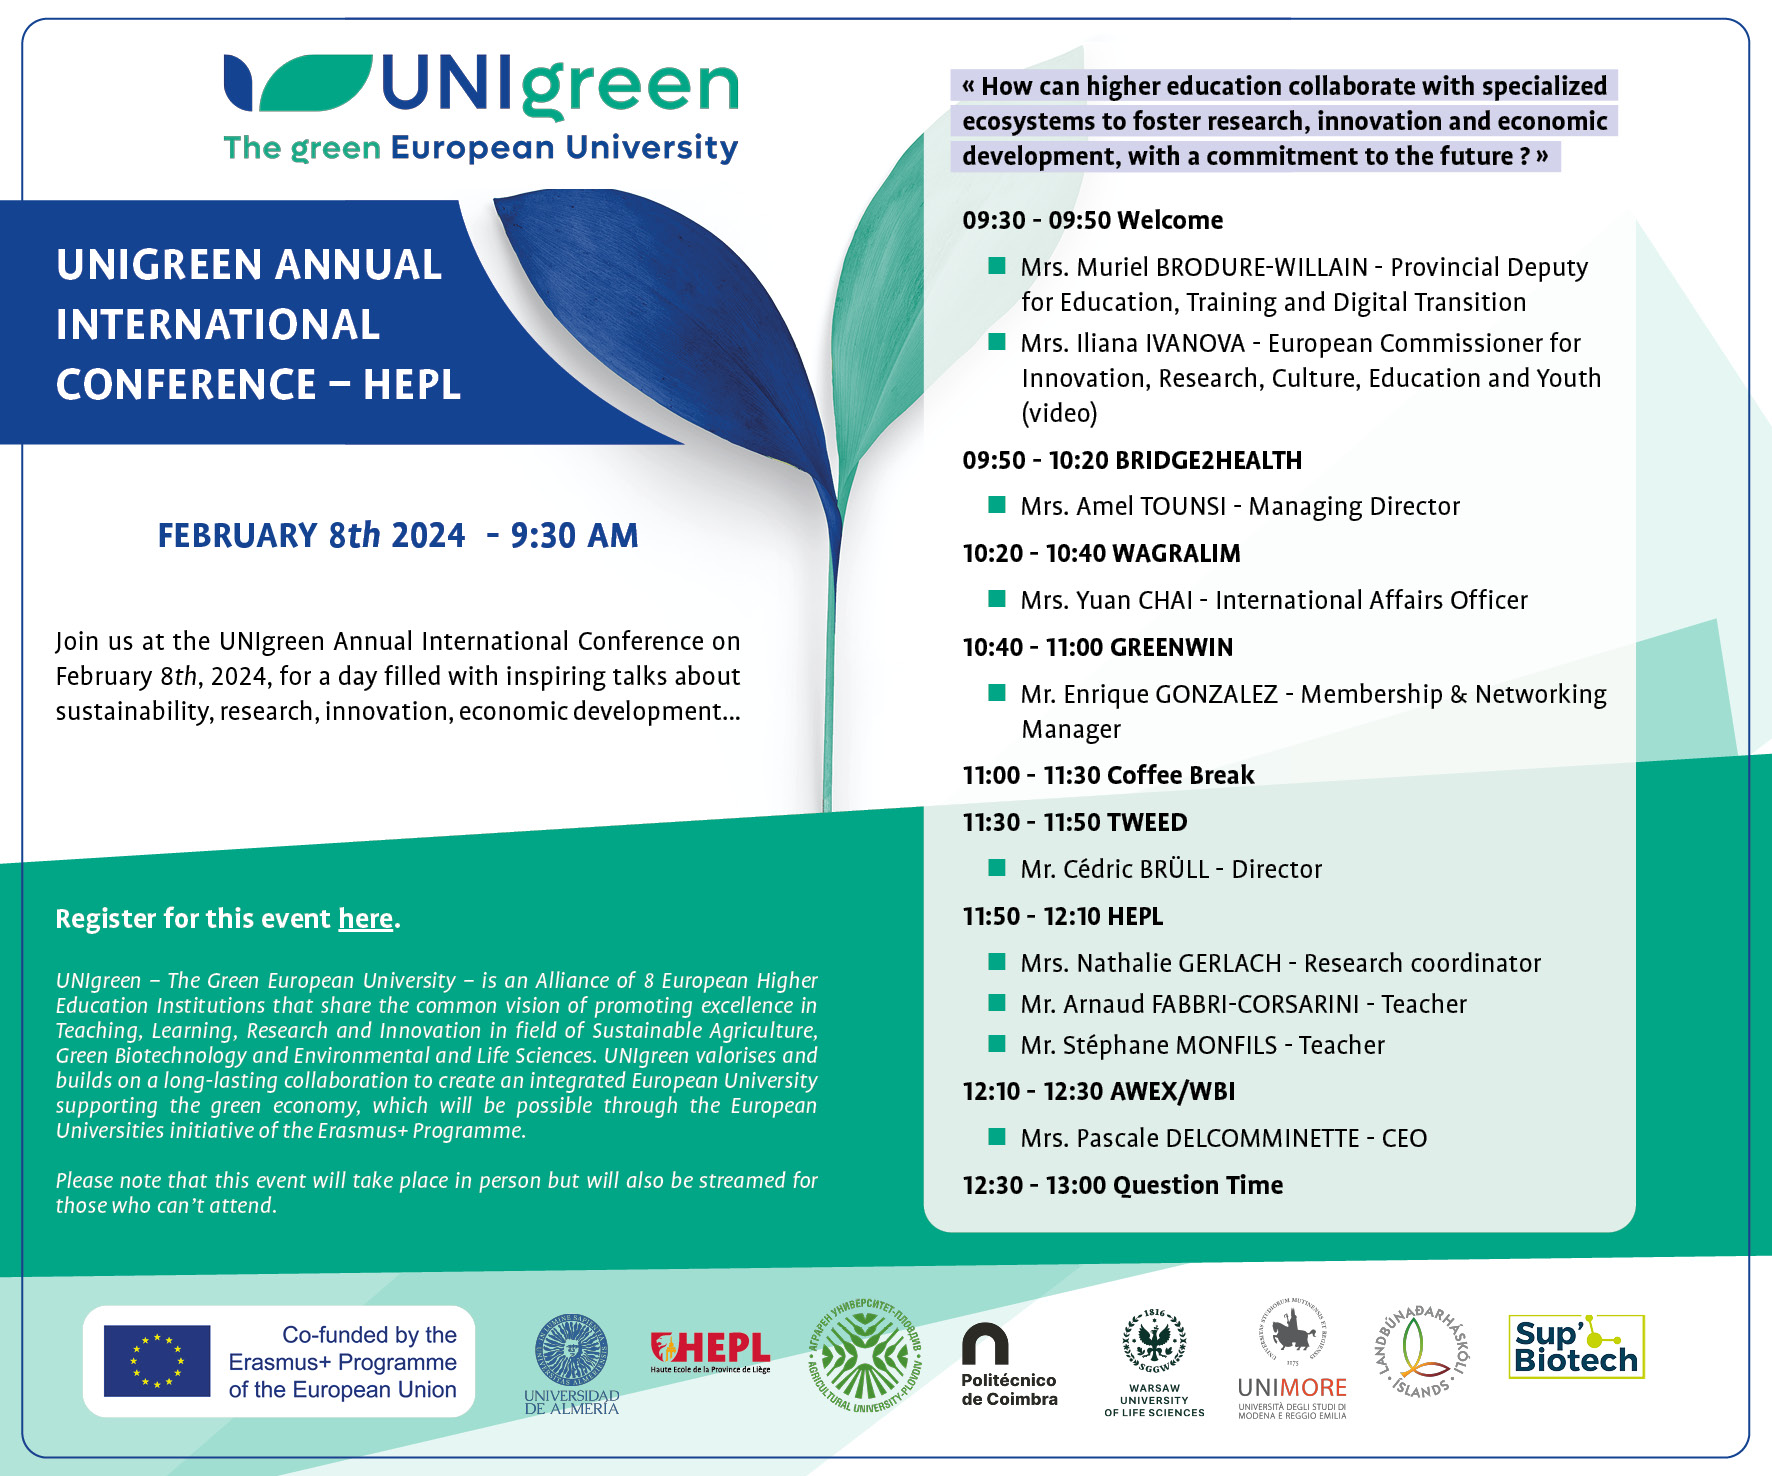 HEPL hosts the first UNIgreen International Conference